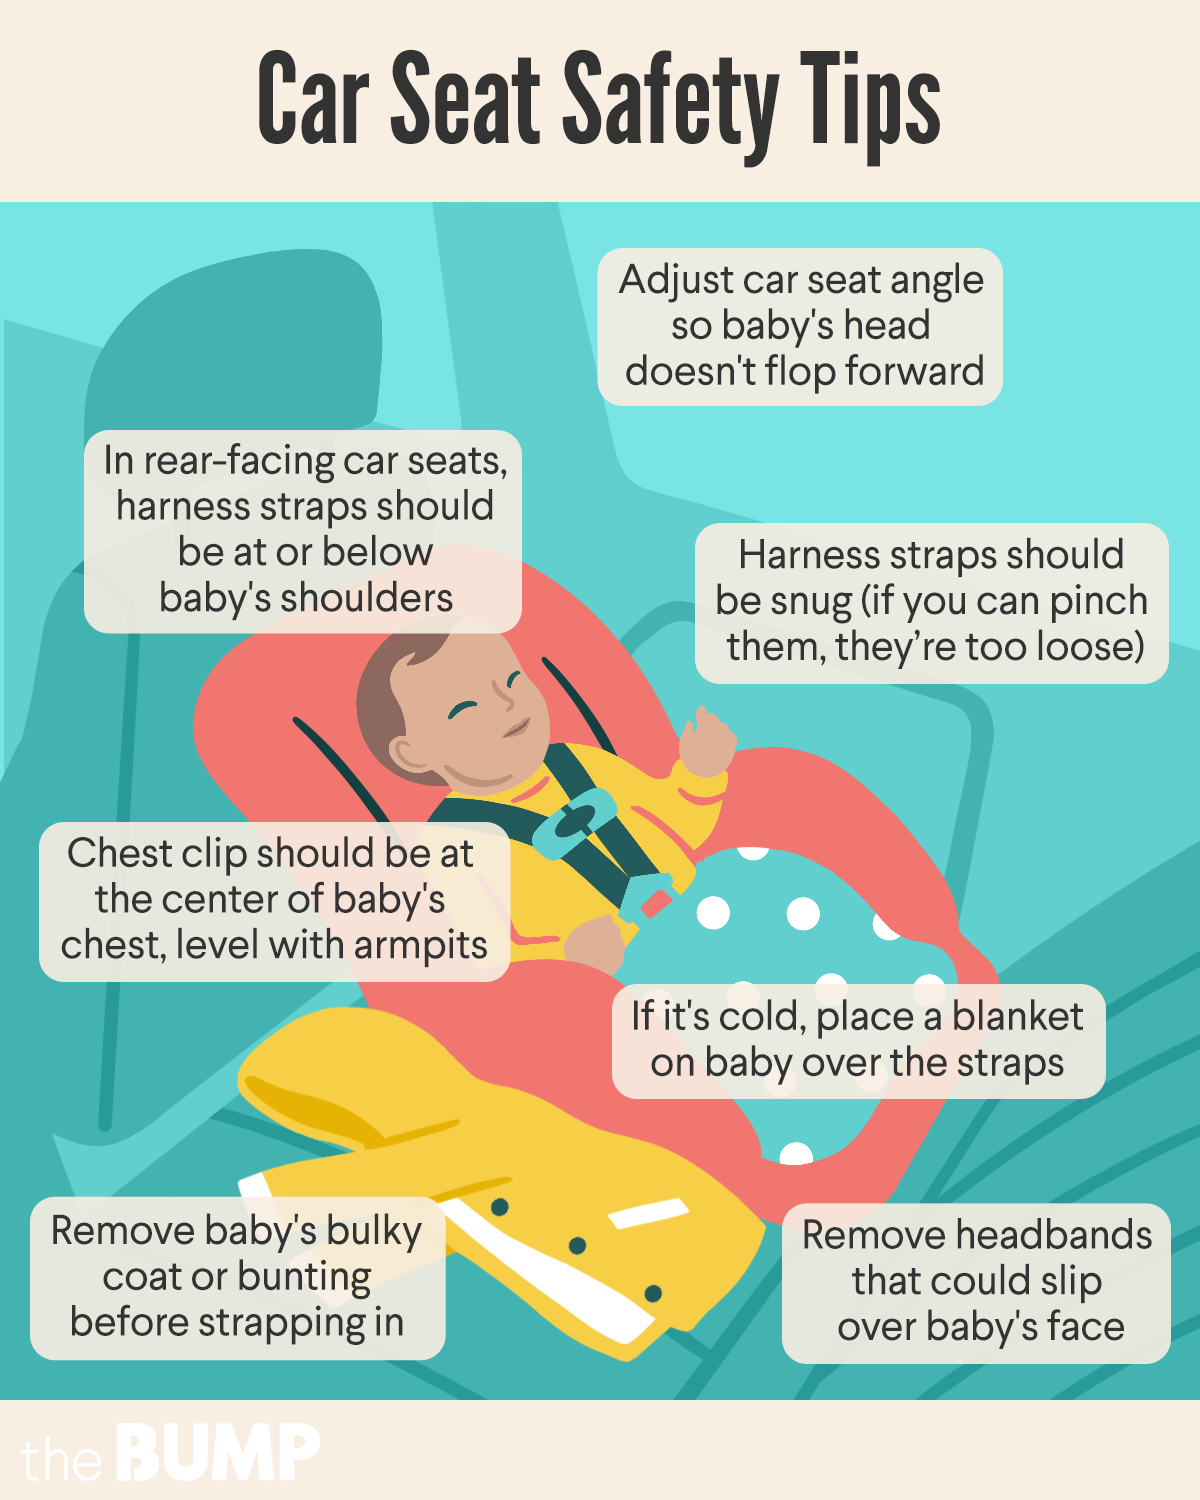 7 Best Infant Car Seats - What Is The Safest Rated Infant Car Seat